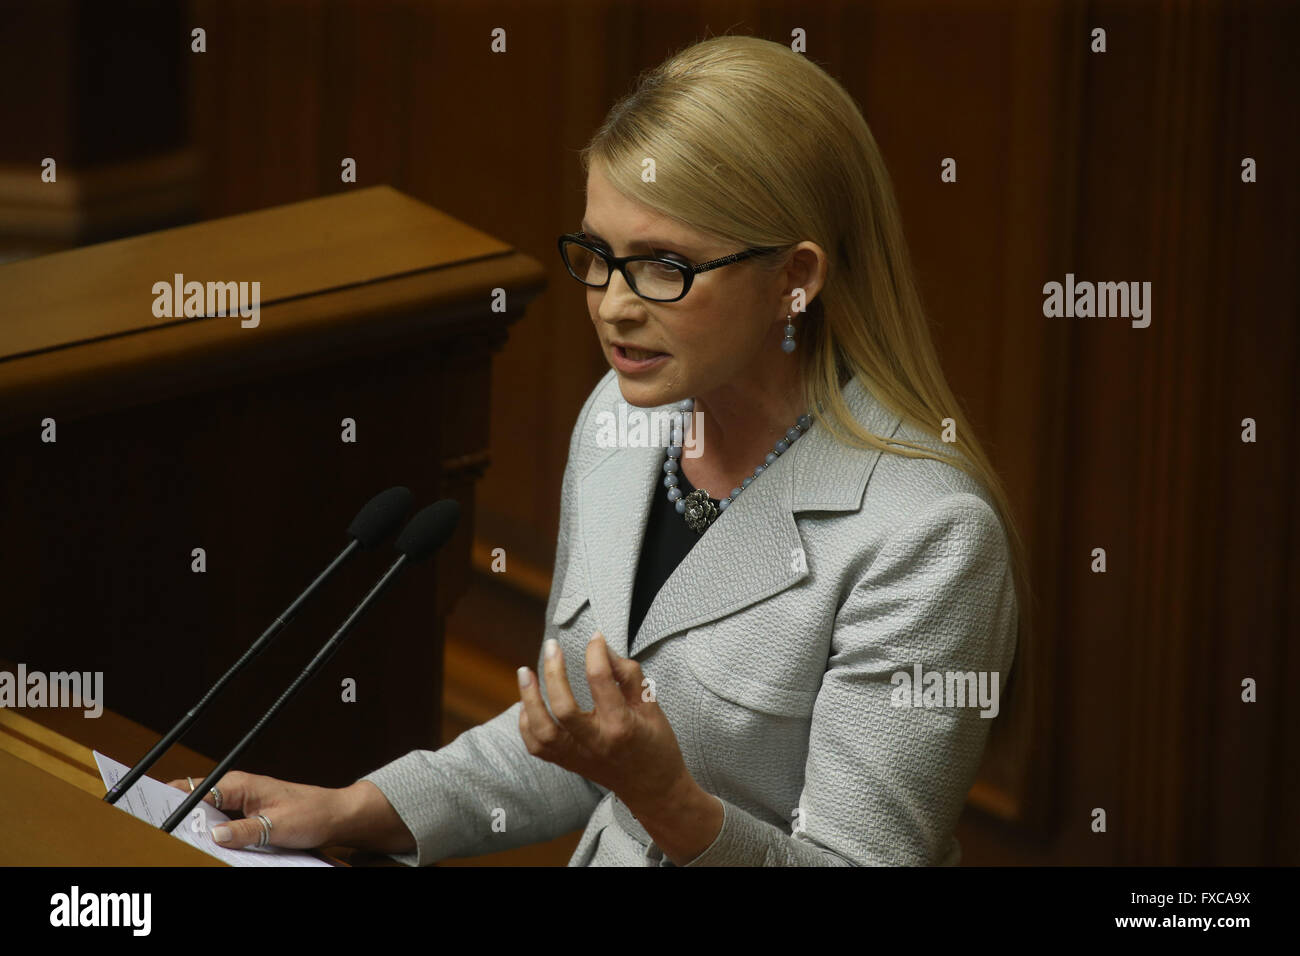 Kiev. 14th Apr, 2016. Former Ukrainian Prime Minister and leader of the Fatherland party Yulia Tymoshenko speaks at a parliament session in Kiev, Ukraine on April 14, 2016. The Ukrainian parliament approved the formation of a new cabinet on Thursday following a replacement of the prime minister. © Xinhua/Alamy Live News Stock Photo